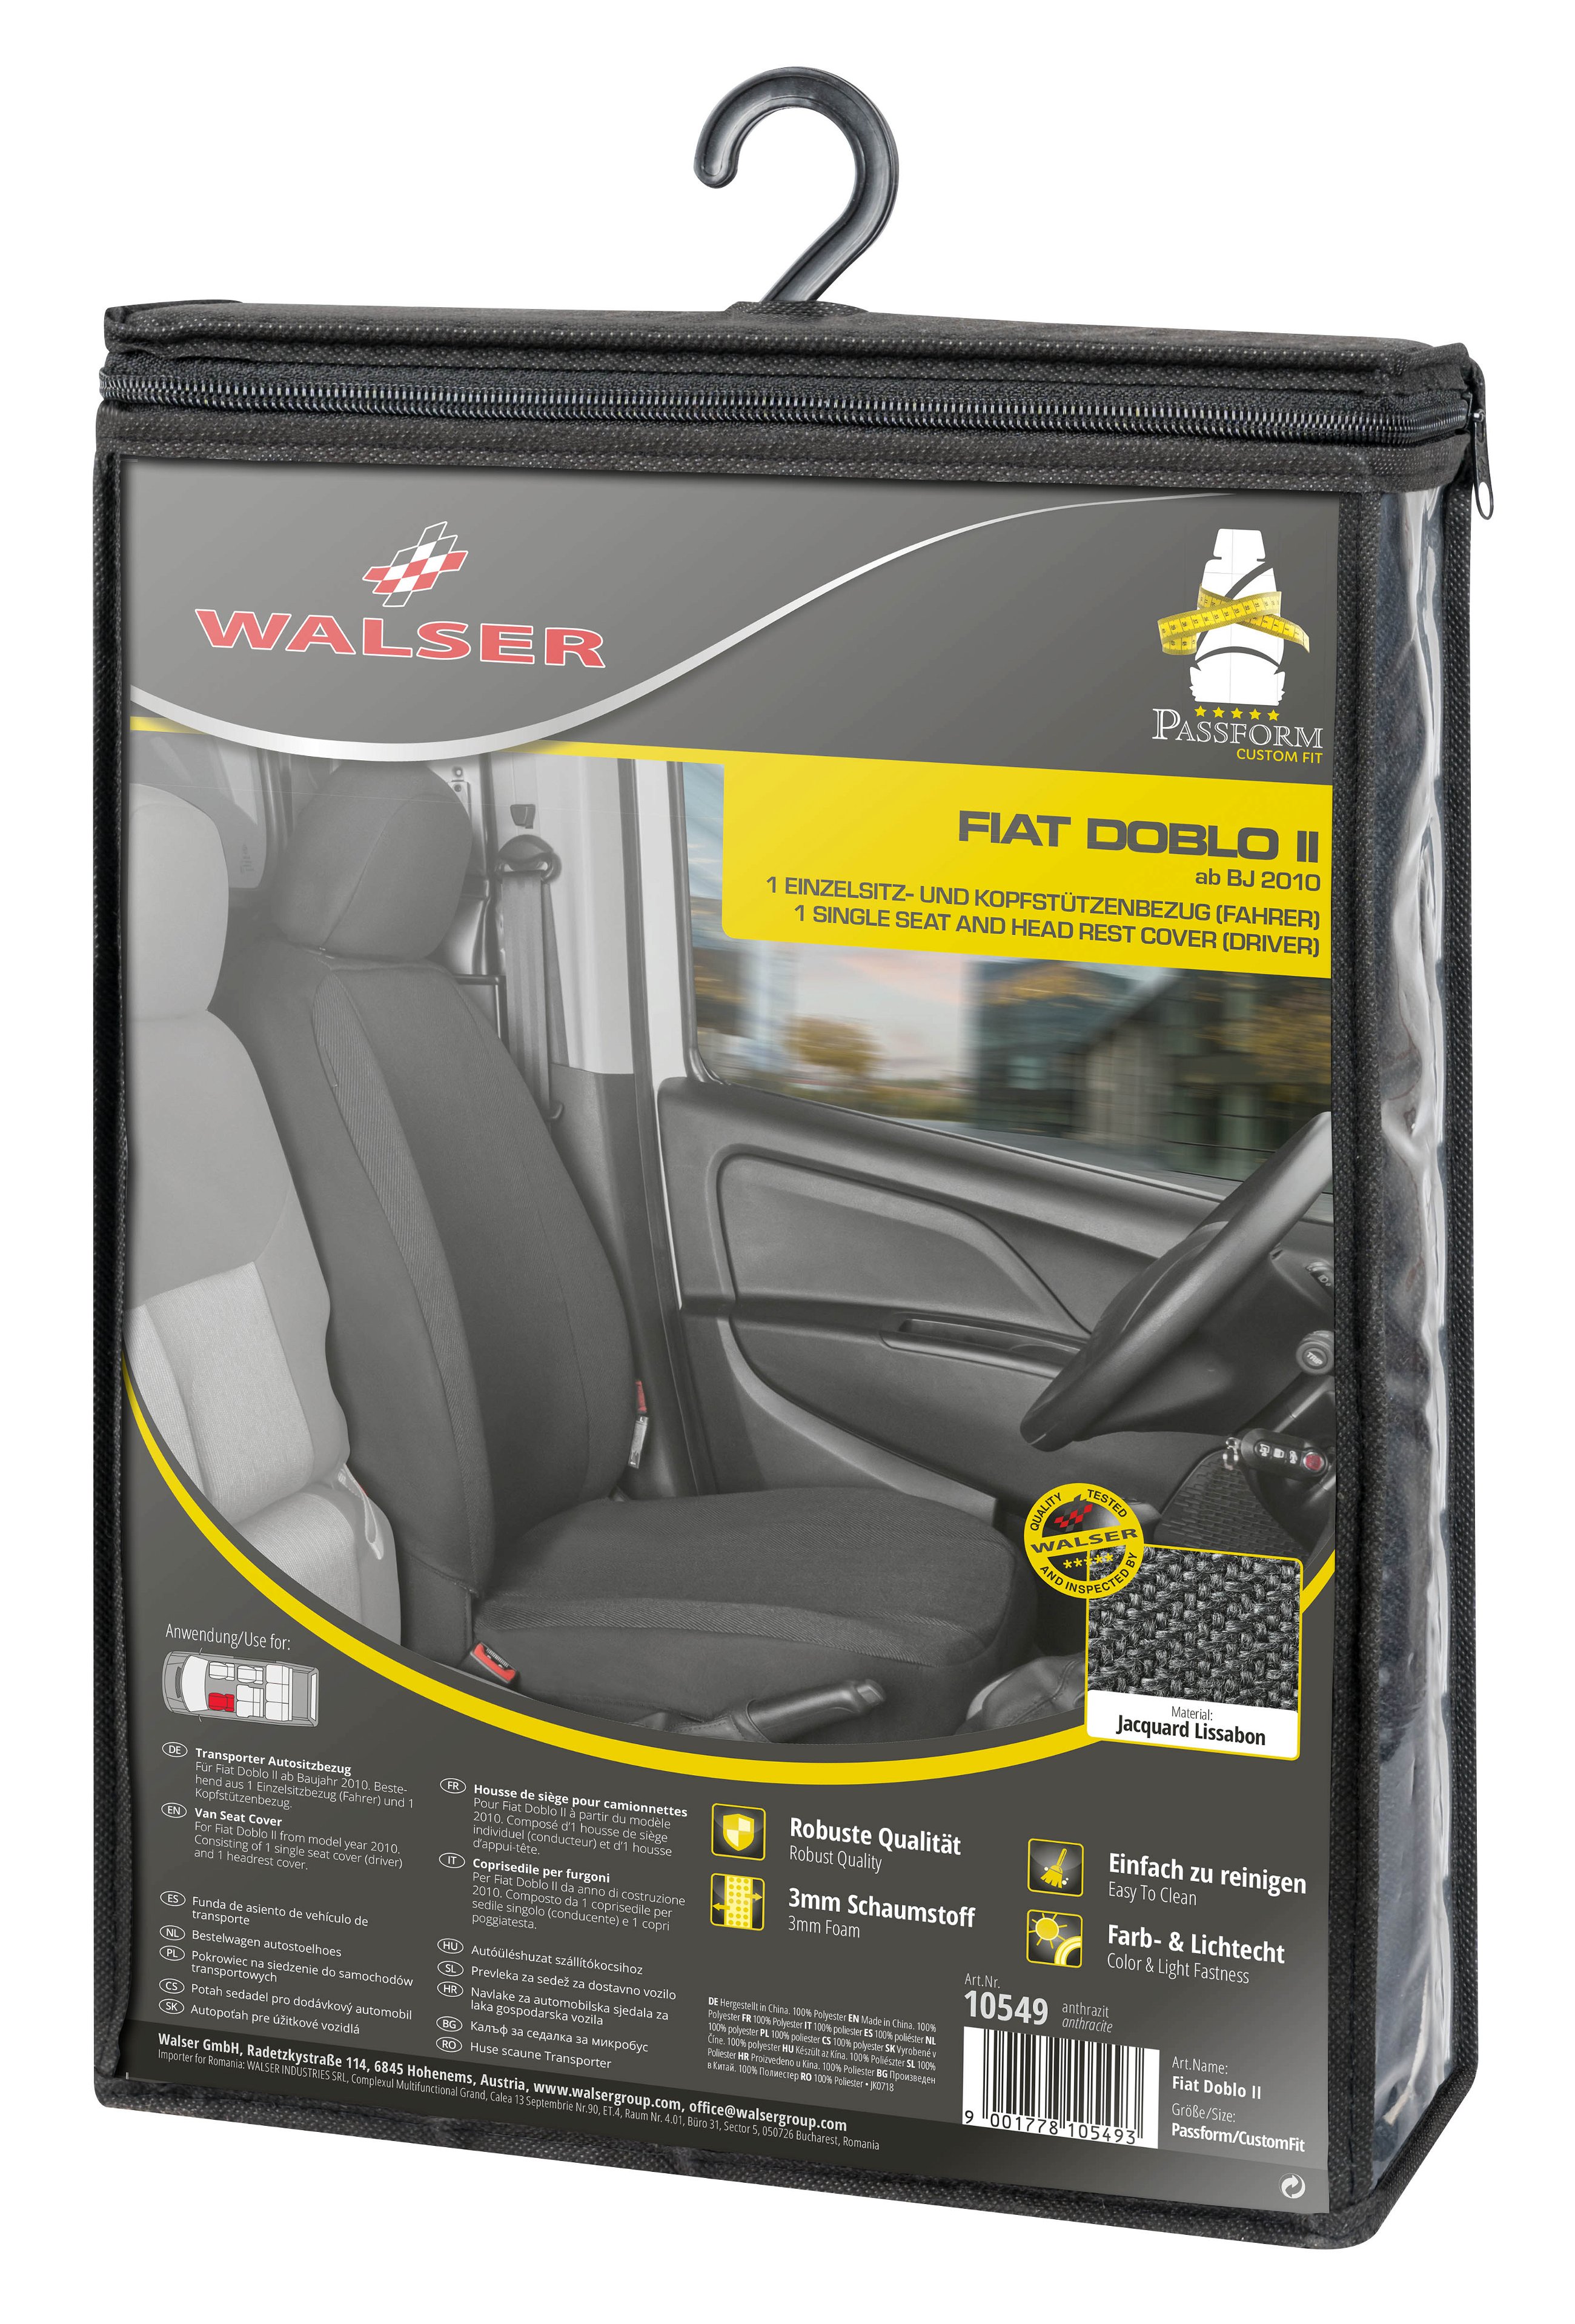 Seat cover made of fabric for Fiat Doblo II, single seat cover driver